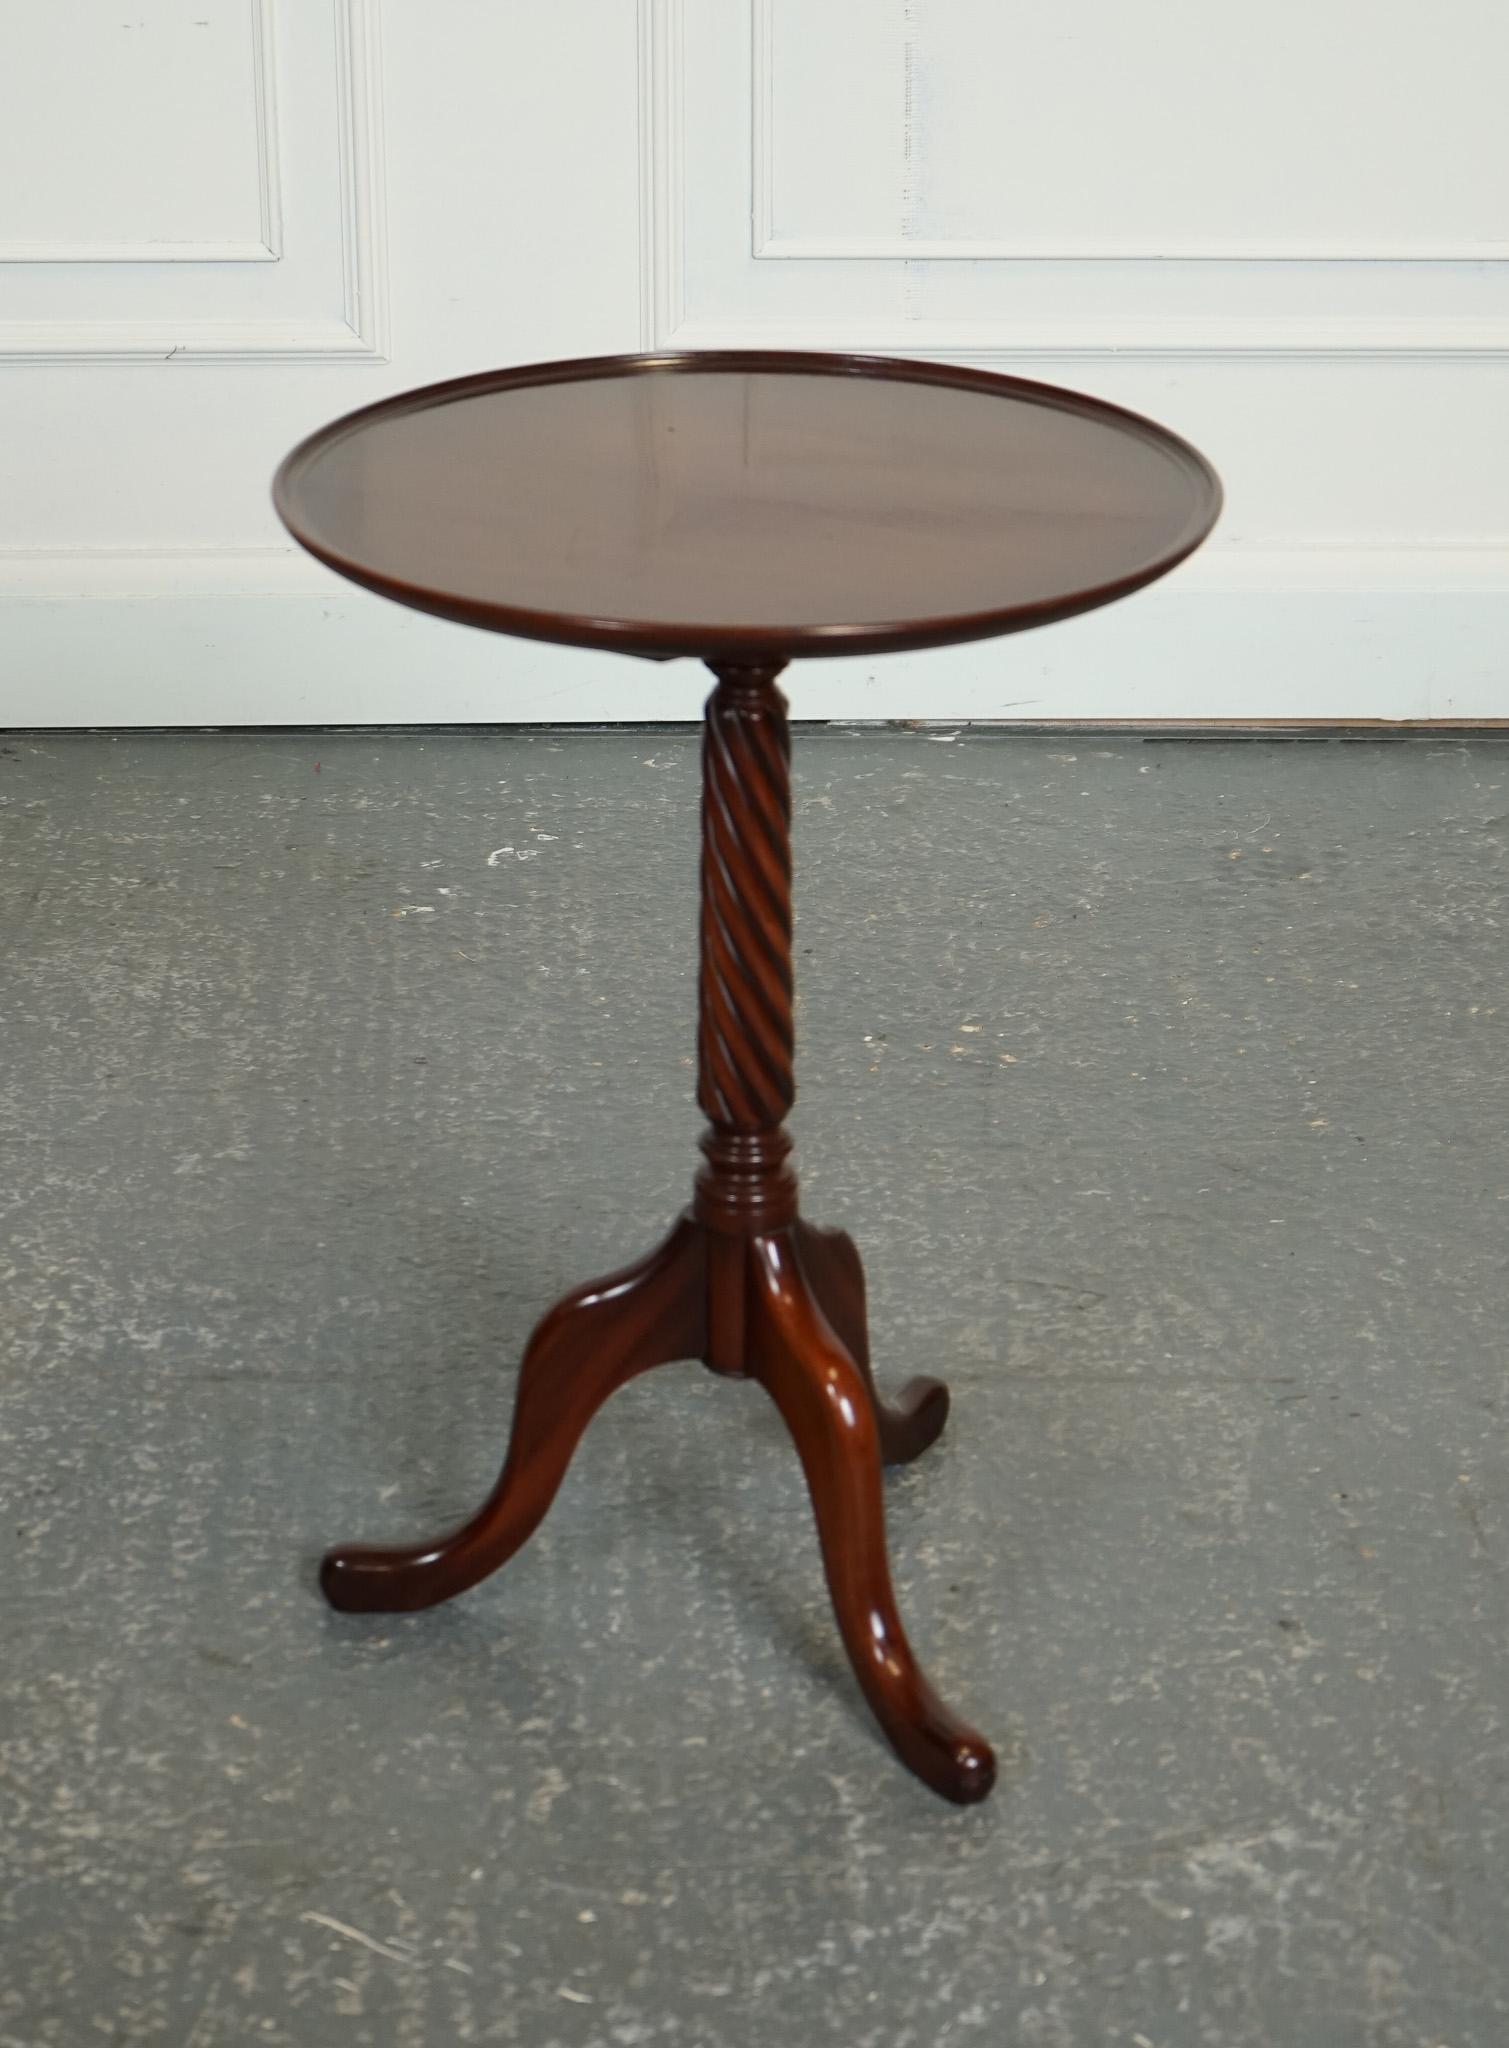 
We are delighted to offer for sale this Lovely Vintage Barley Twist Base On Tripod Feet Side Lamp Table

A barley twist base side table on tripod feet is a beautiful and unique piece of furniture that blends classic elegance with a touch of rustic